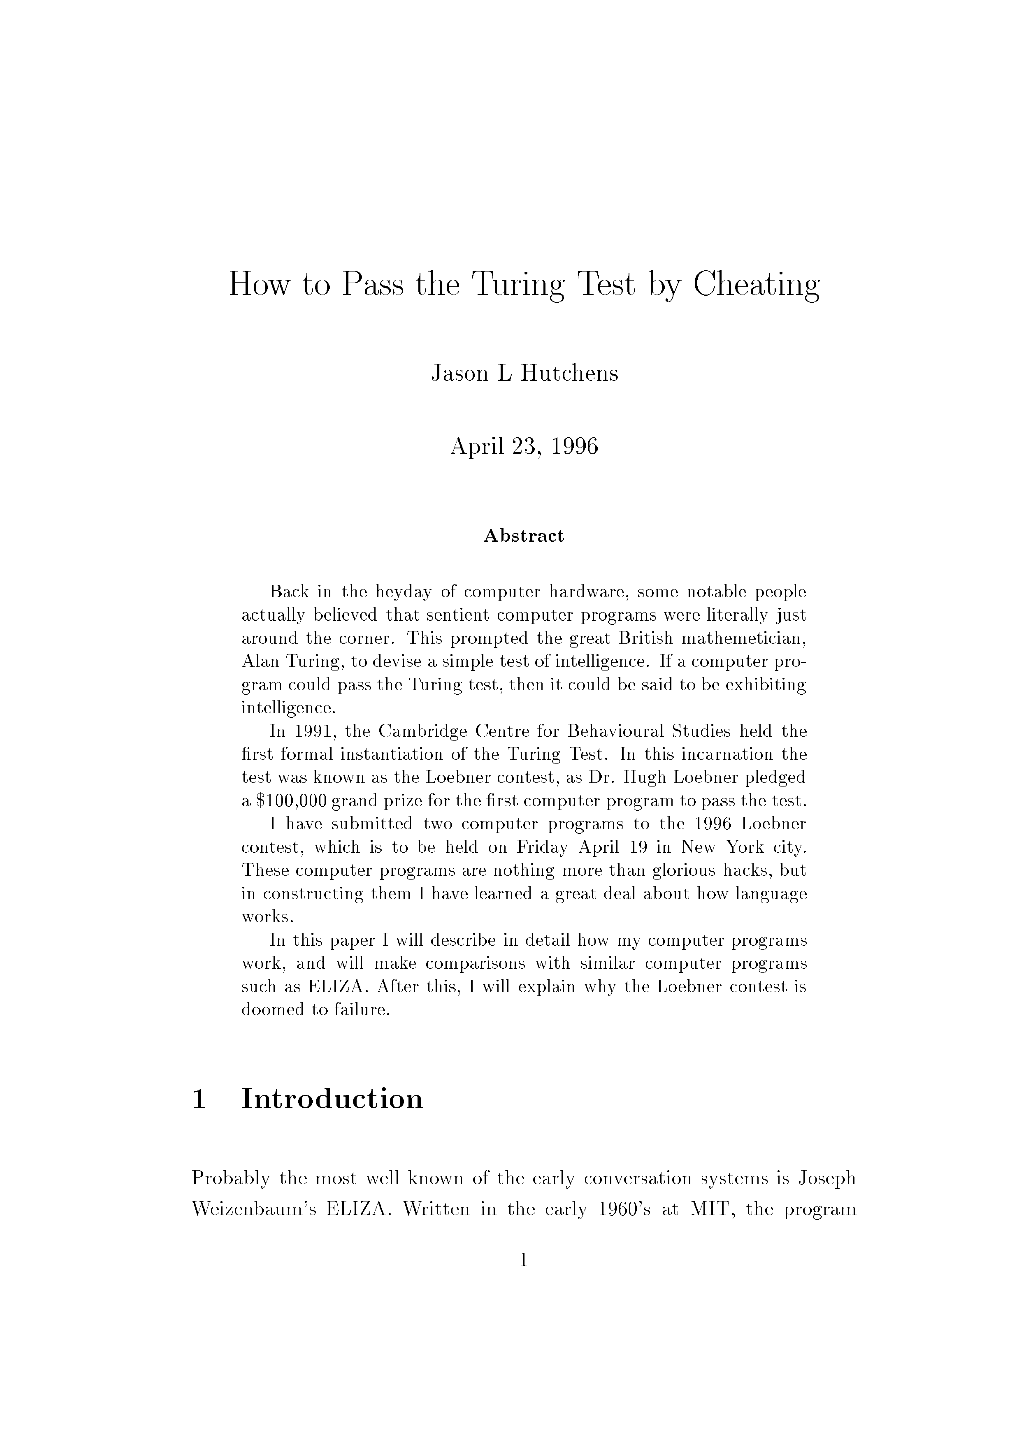 How to Pass the Turing Test by Cheating 1 Introduction